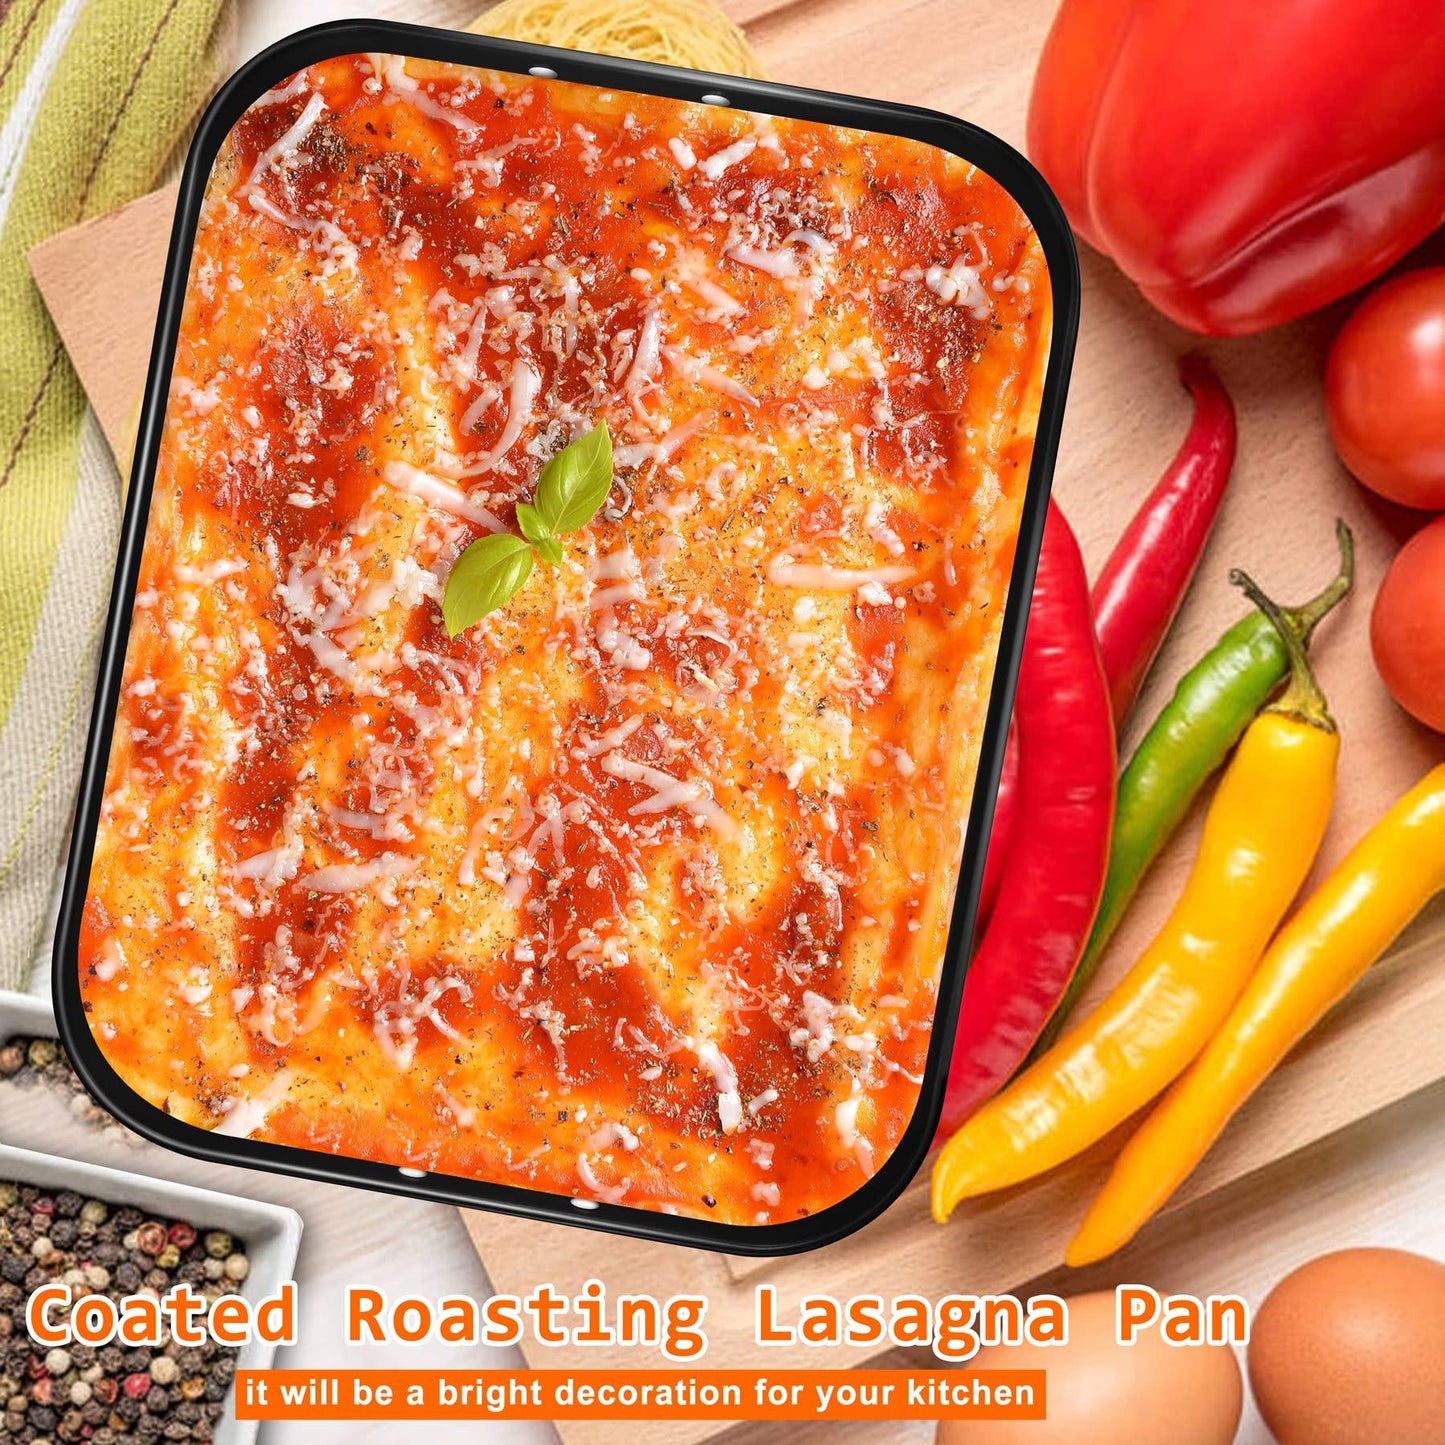 mobzio Lasagna Pan Deep, Baking Pan for Oven, 16x12x3 Inch Baking Dishes for Oven, Roasting Pan Brownie Pan with Handles, Rectangle Cake Pans Sets for Baking, Deep Baking Pan, Nonstick Bakeware Set - CookCave